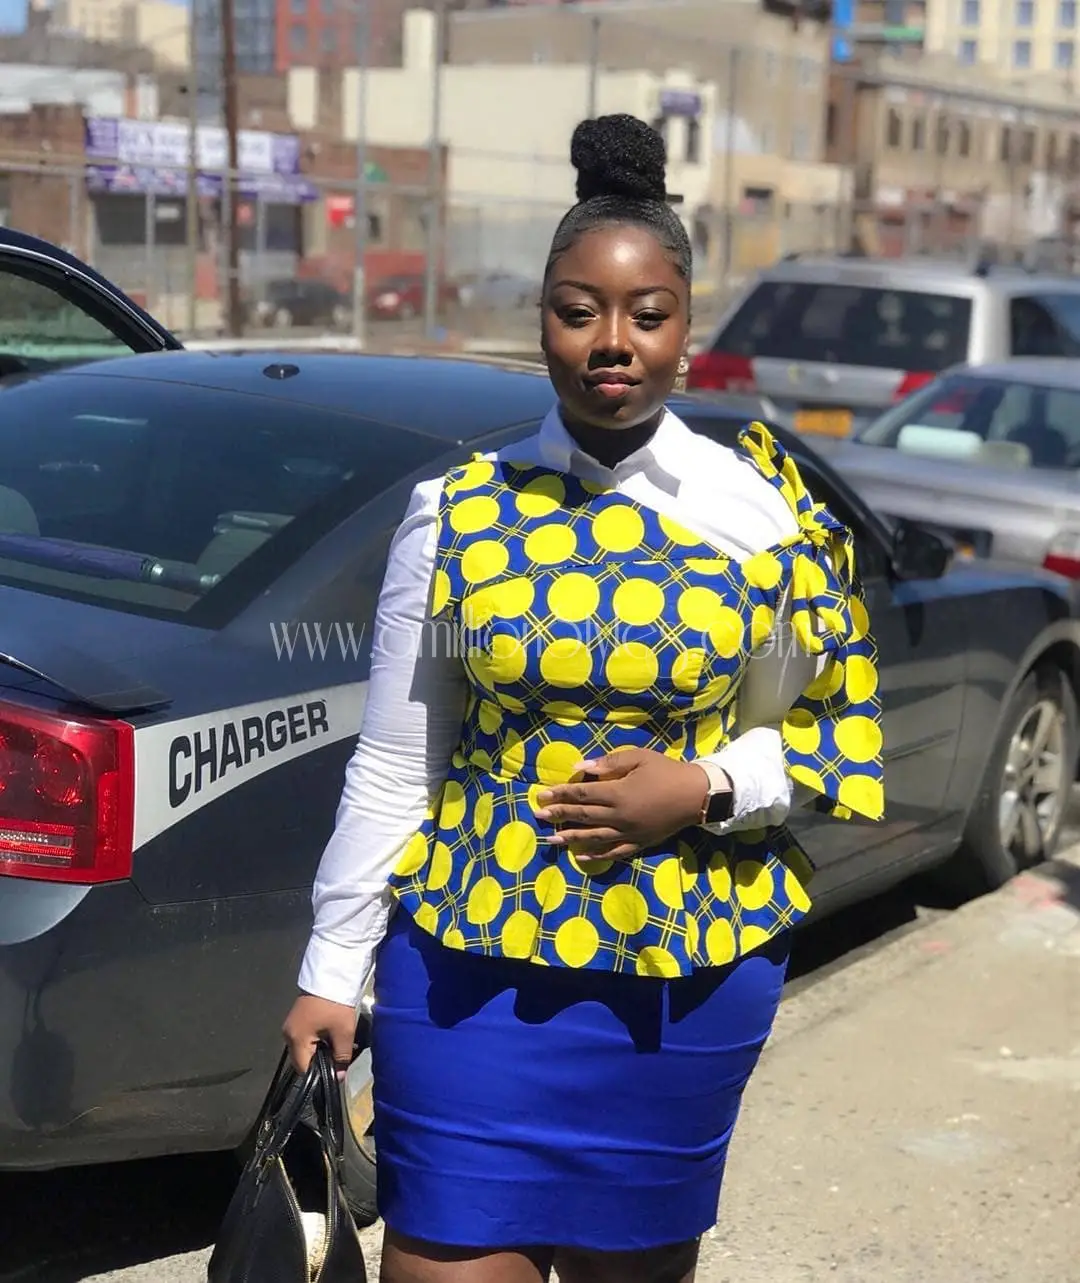 10 Ankara Tops That Are Just Too Cool!